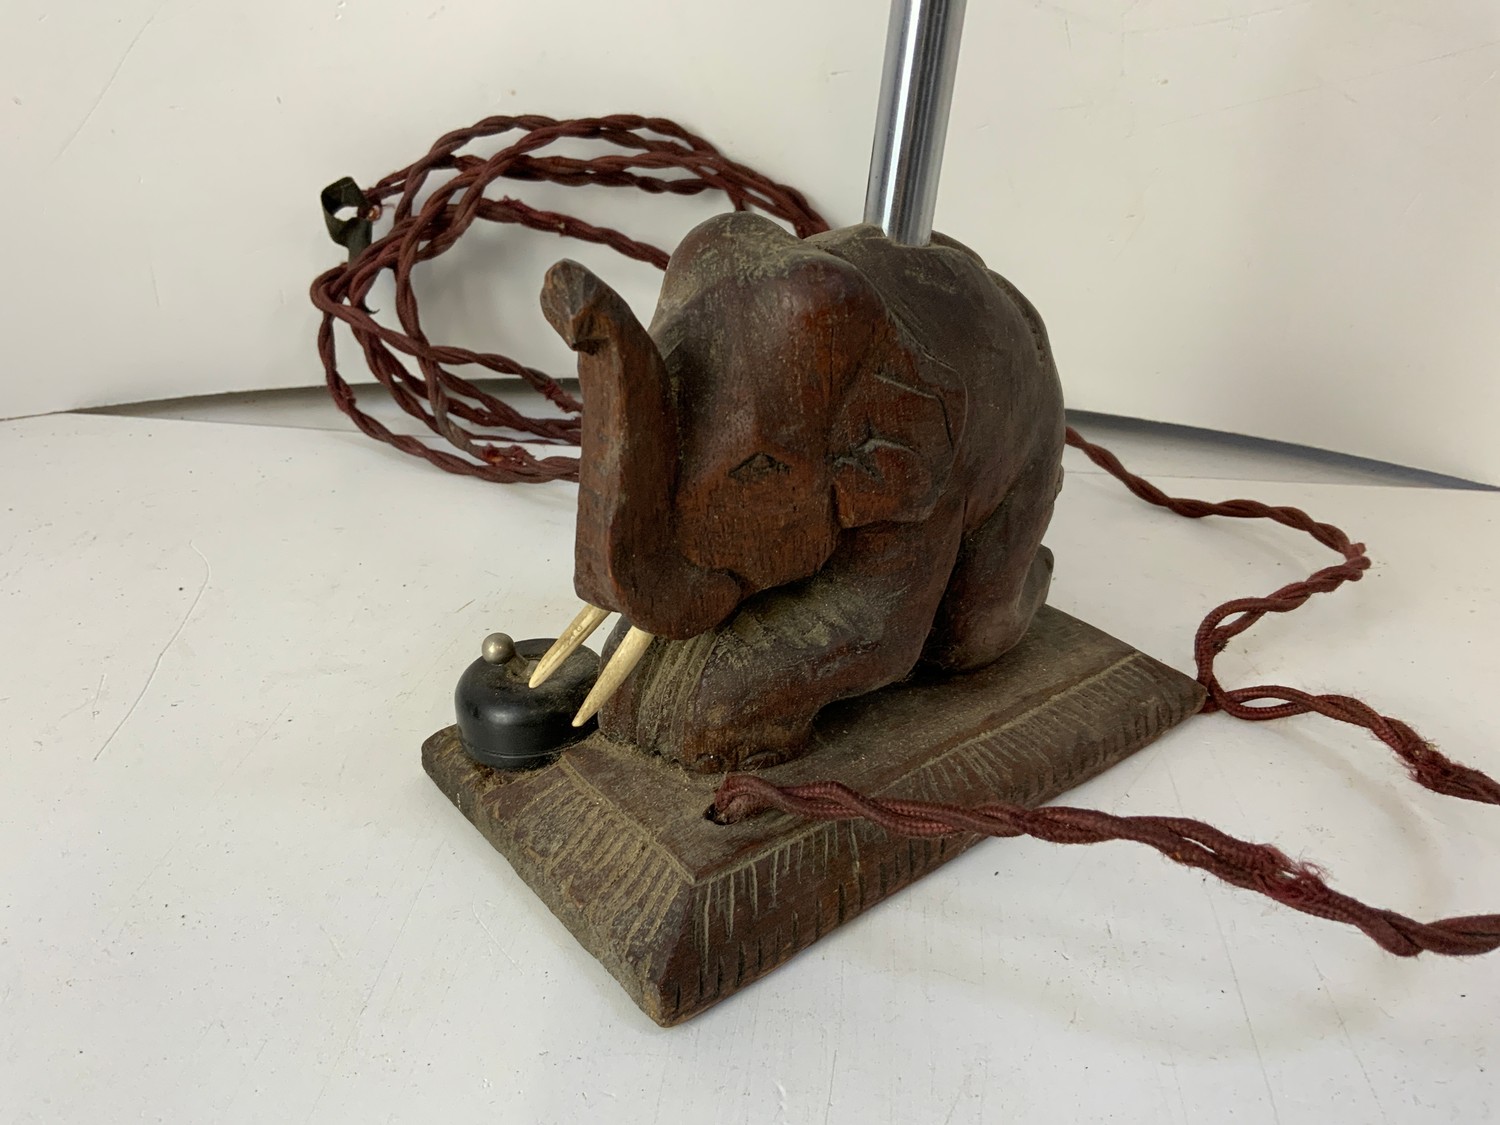 Vintage Elephant Lamp with Clock Insert - Image 3 of 3